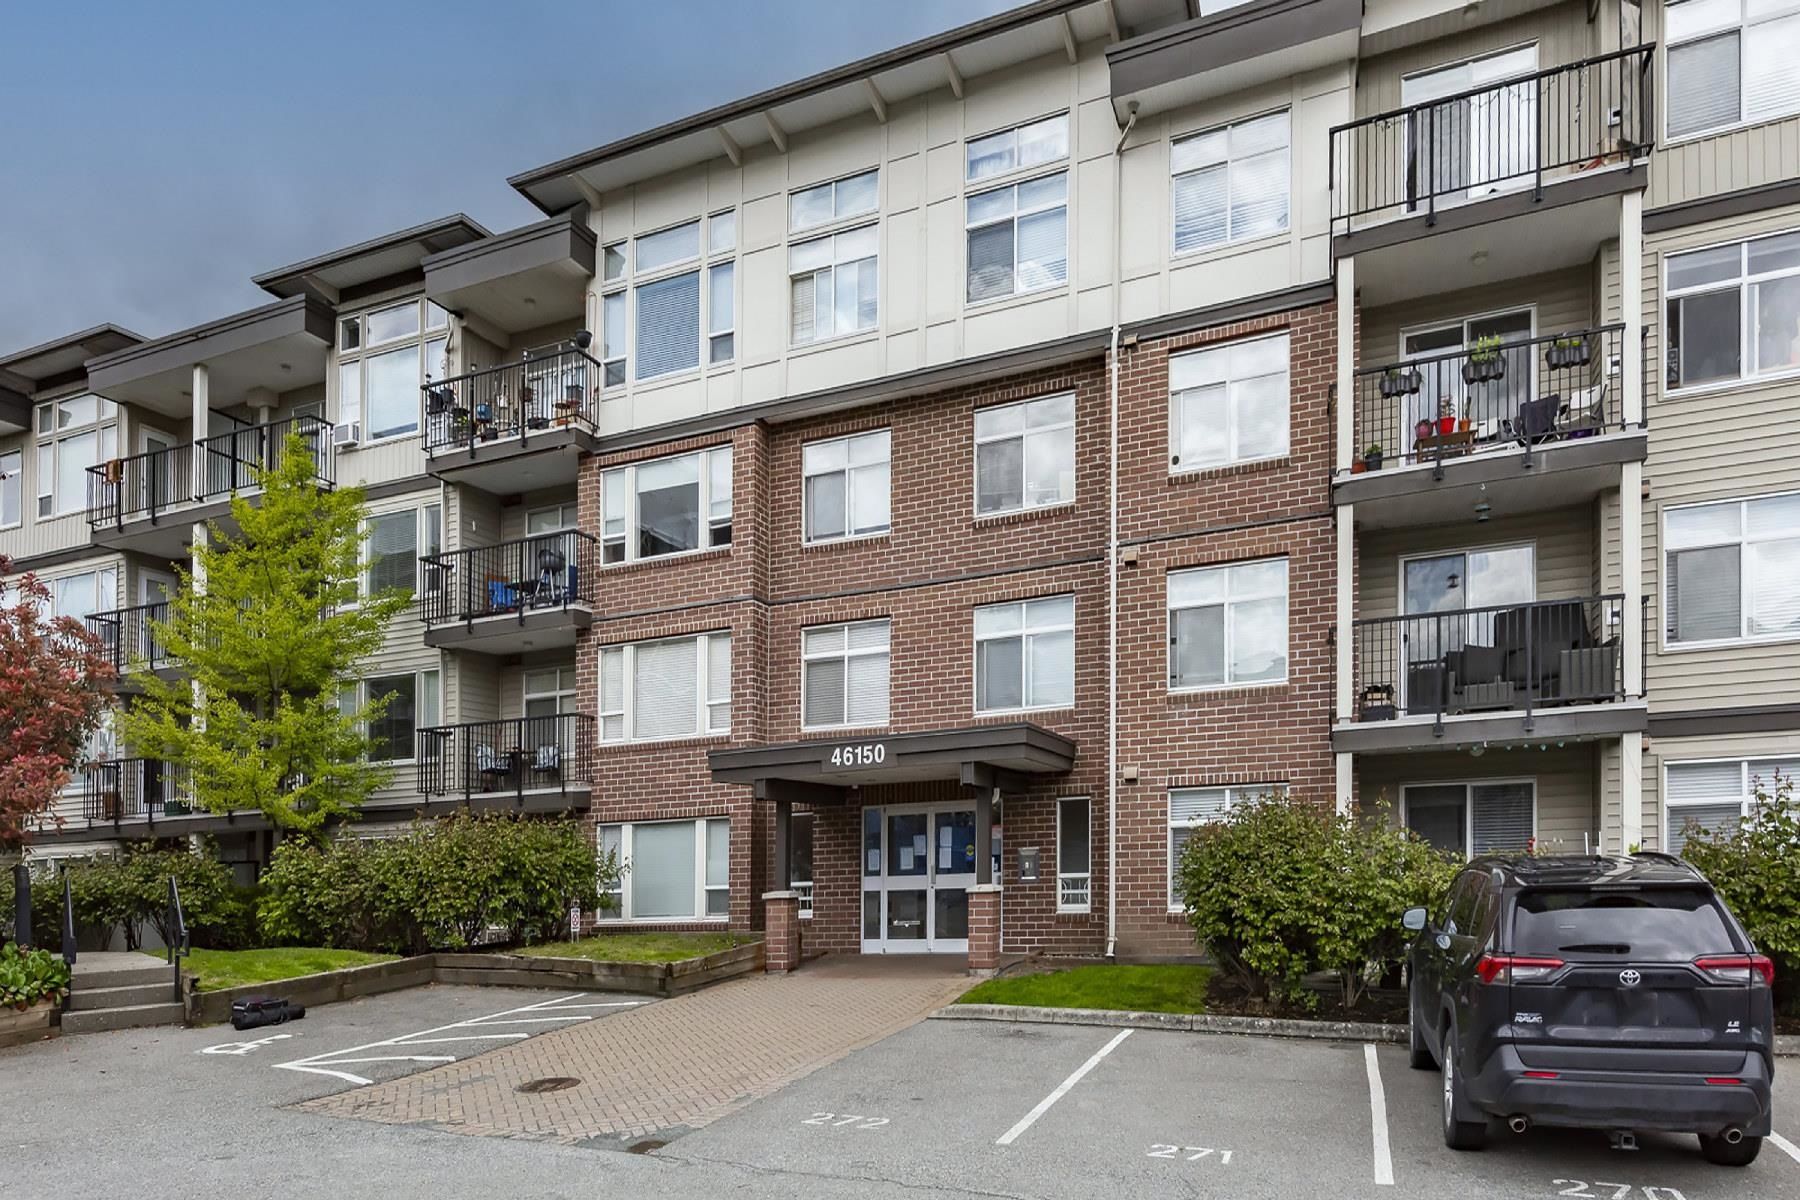 I have sold a property at 413 46150 BOLE AVE in CHILLIWACK
